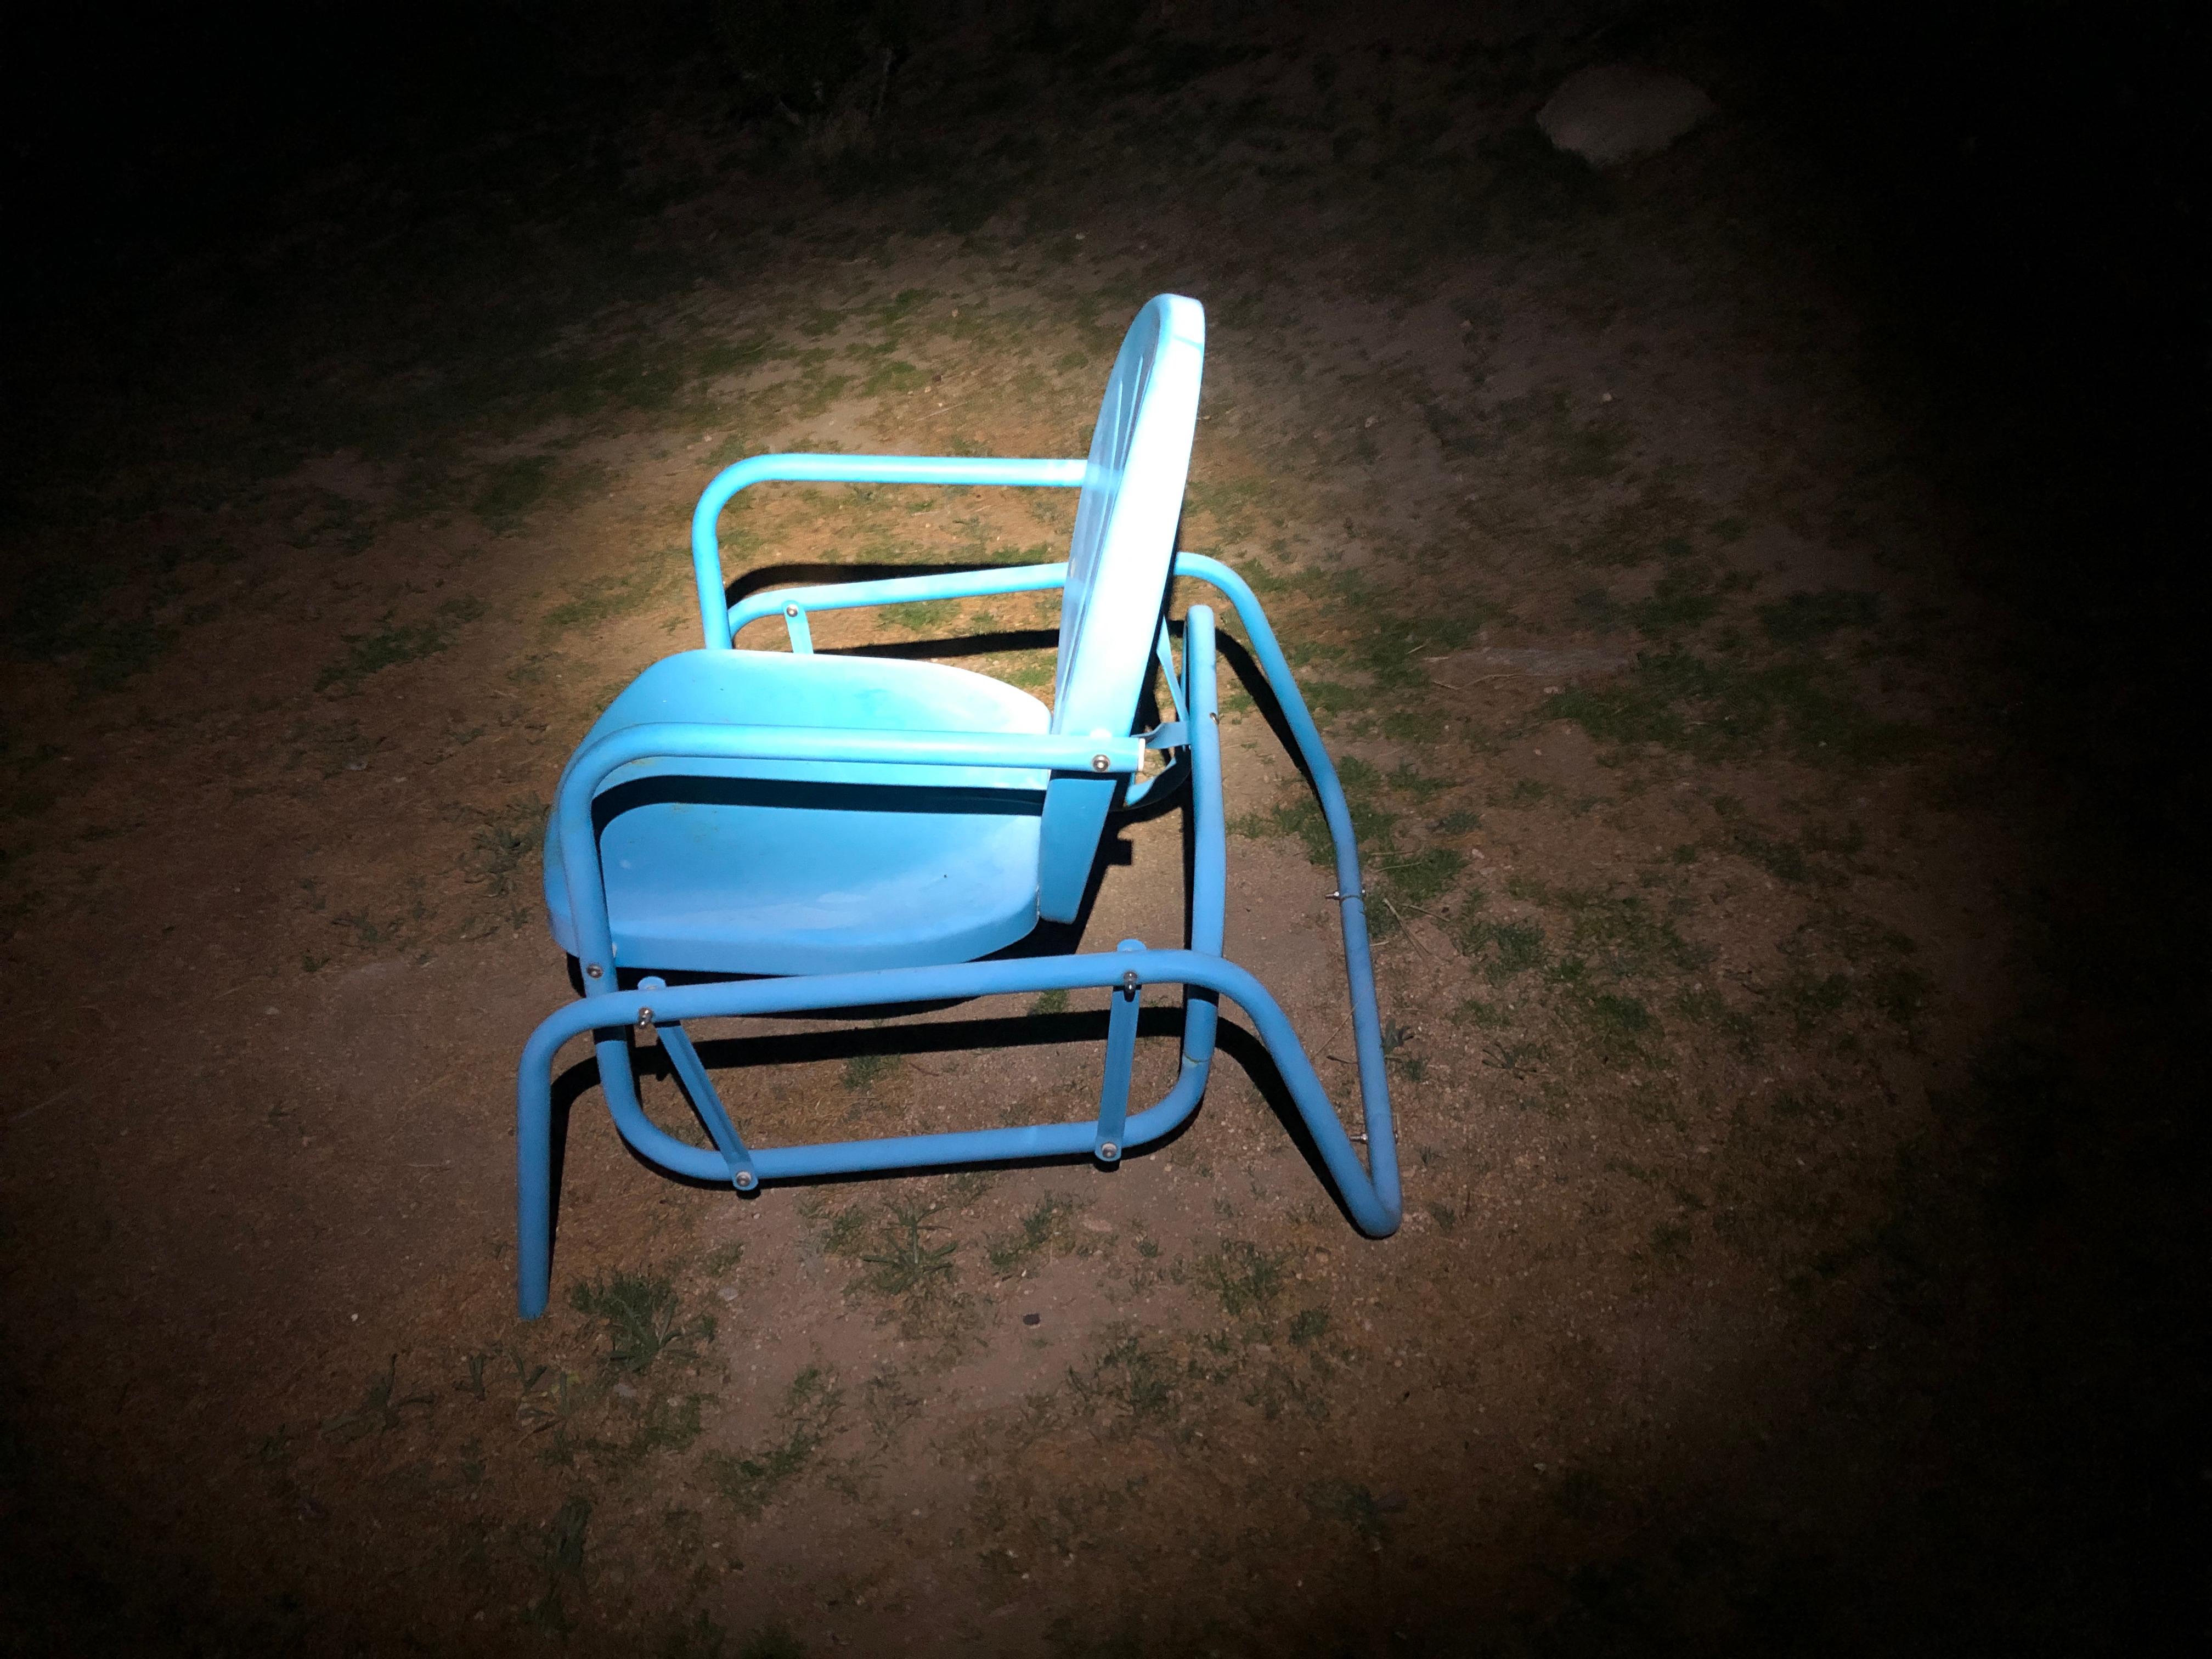 ANONYMOUS Landscape Photograph - Blue Chair (Life on Mars)